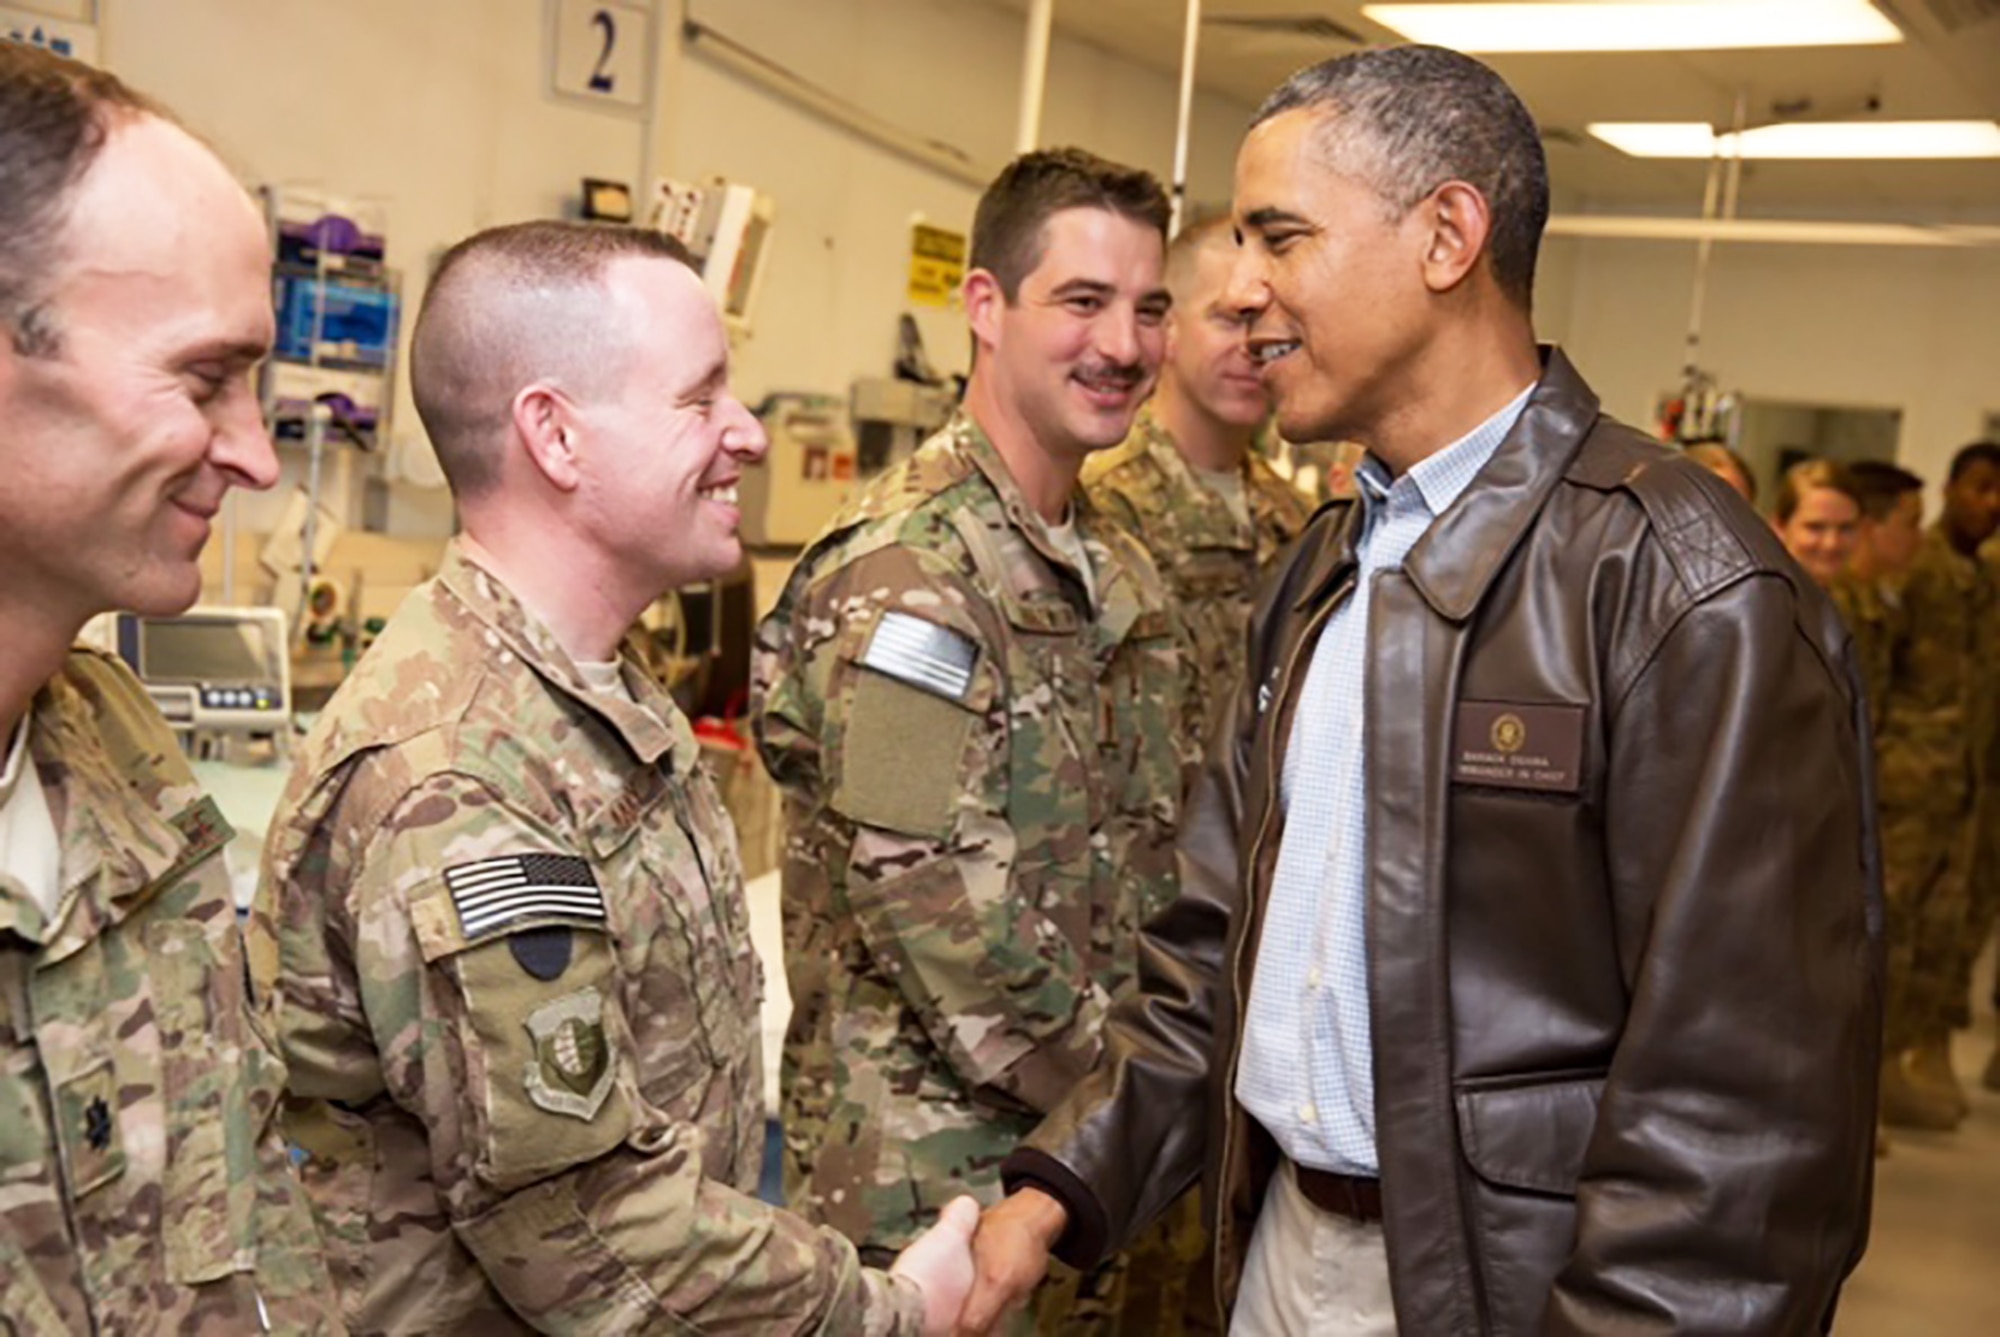 Chaplain (Capt.) Keith Manry shakes hands with President Barack Obama at the Craig Joint Theater Hospital on Bagram Airfield, Afghanistan. Manry along with a group of 25 other service members were selected to meet the president during a Memorial Day weekend visit in 2014. Manry is assigned to the 341st Missile Wing at Malmstrom Air Force Base, Mont., and was recently awarded the Air Force Chaplain Corps Company Grade Officer Chaplain of the Year for 2014. (Courtesy photo)